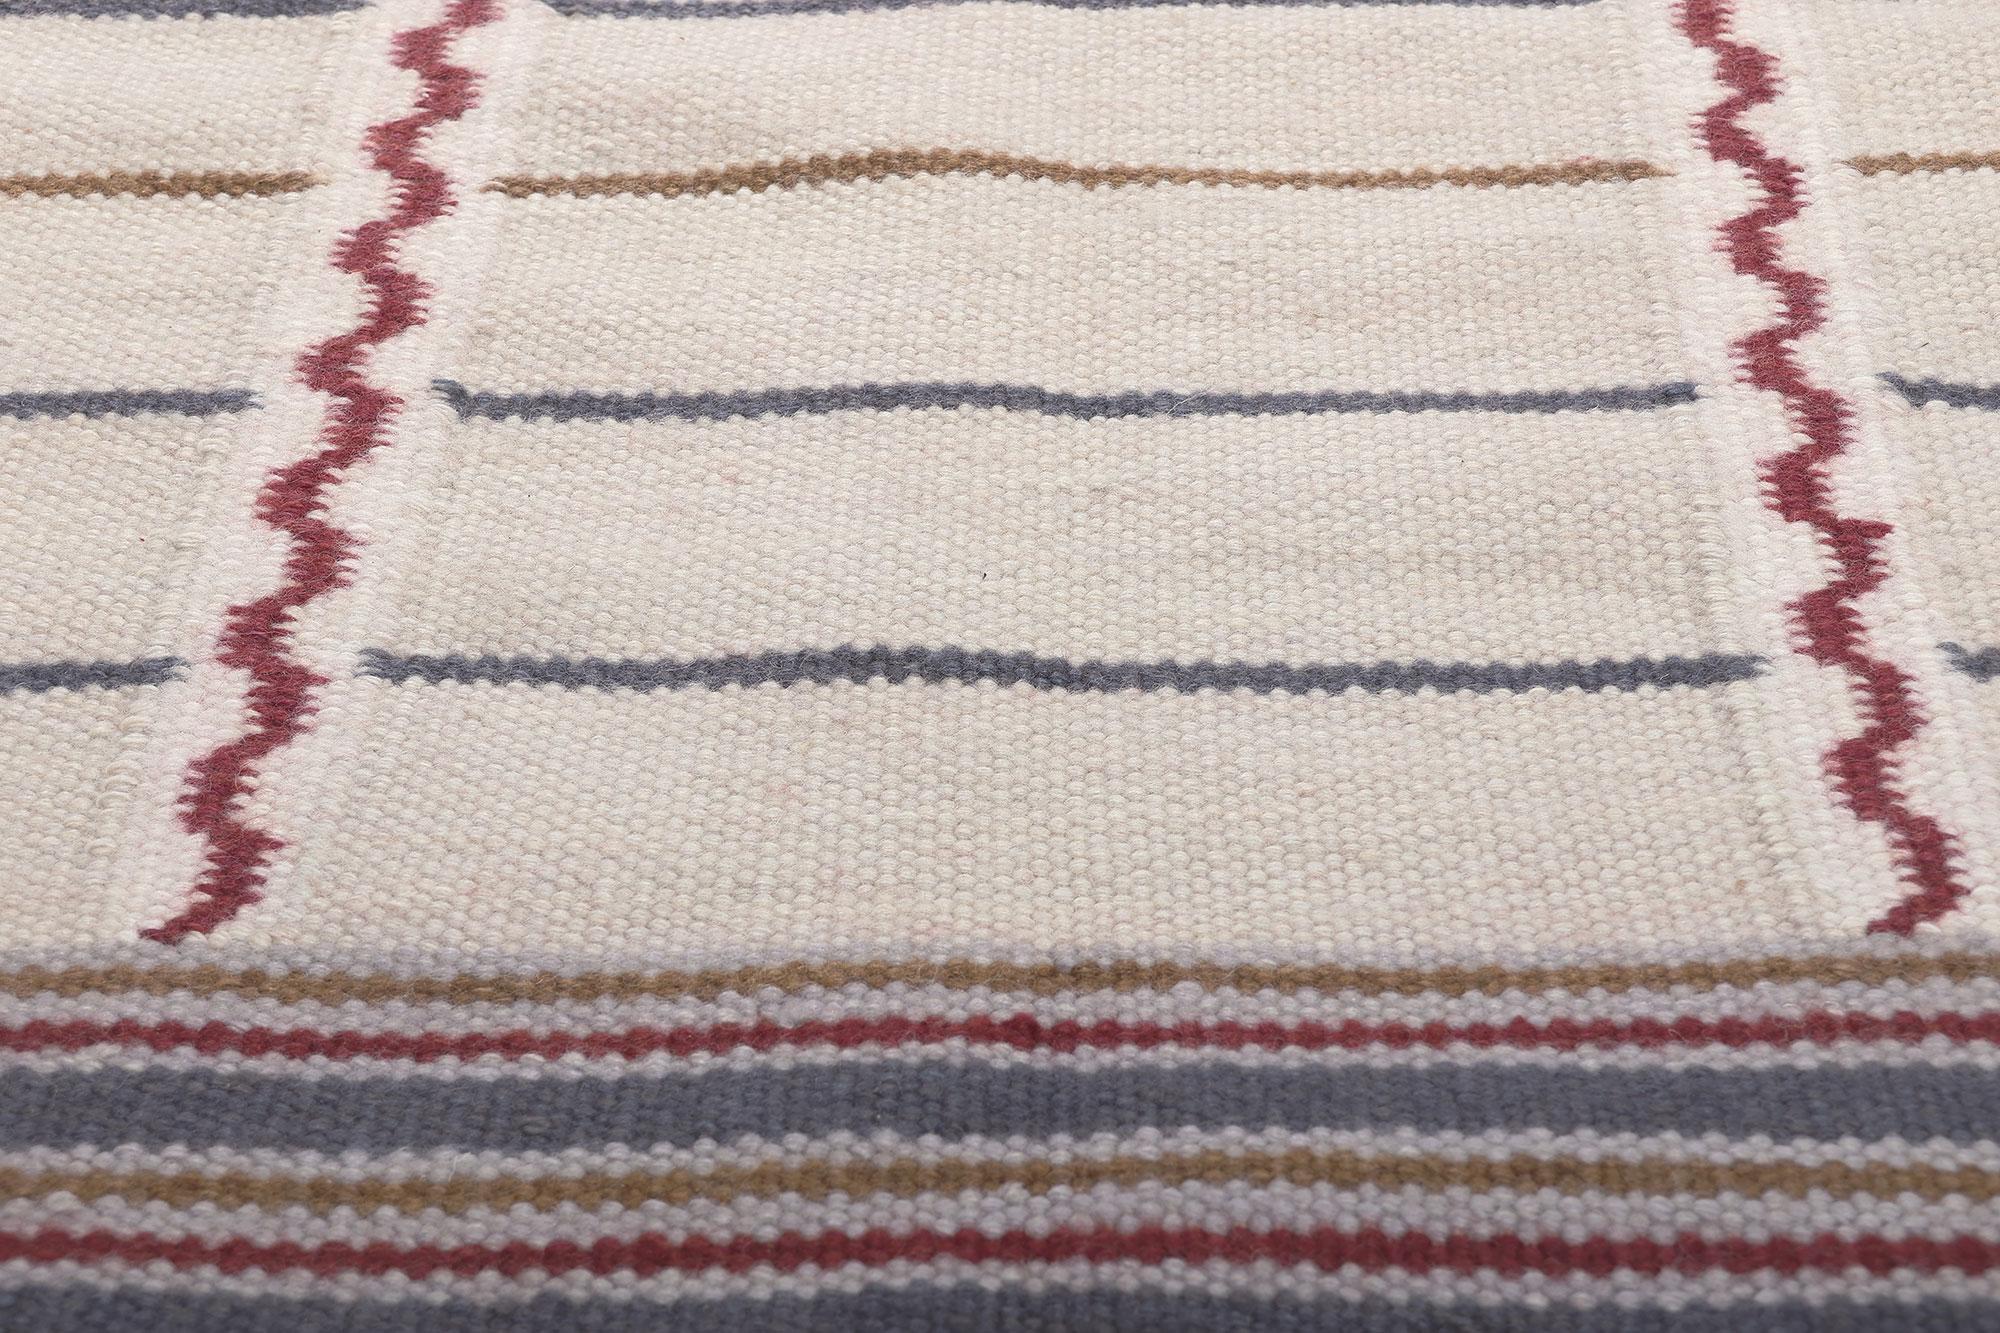 Swedish Inspired Kilim Rug, Scandinavian Modern Meets Cubist Minimalism In New Condition For Sale In Dallas, TX